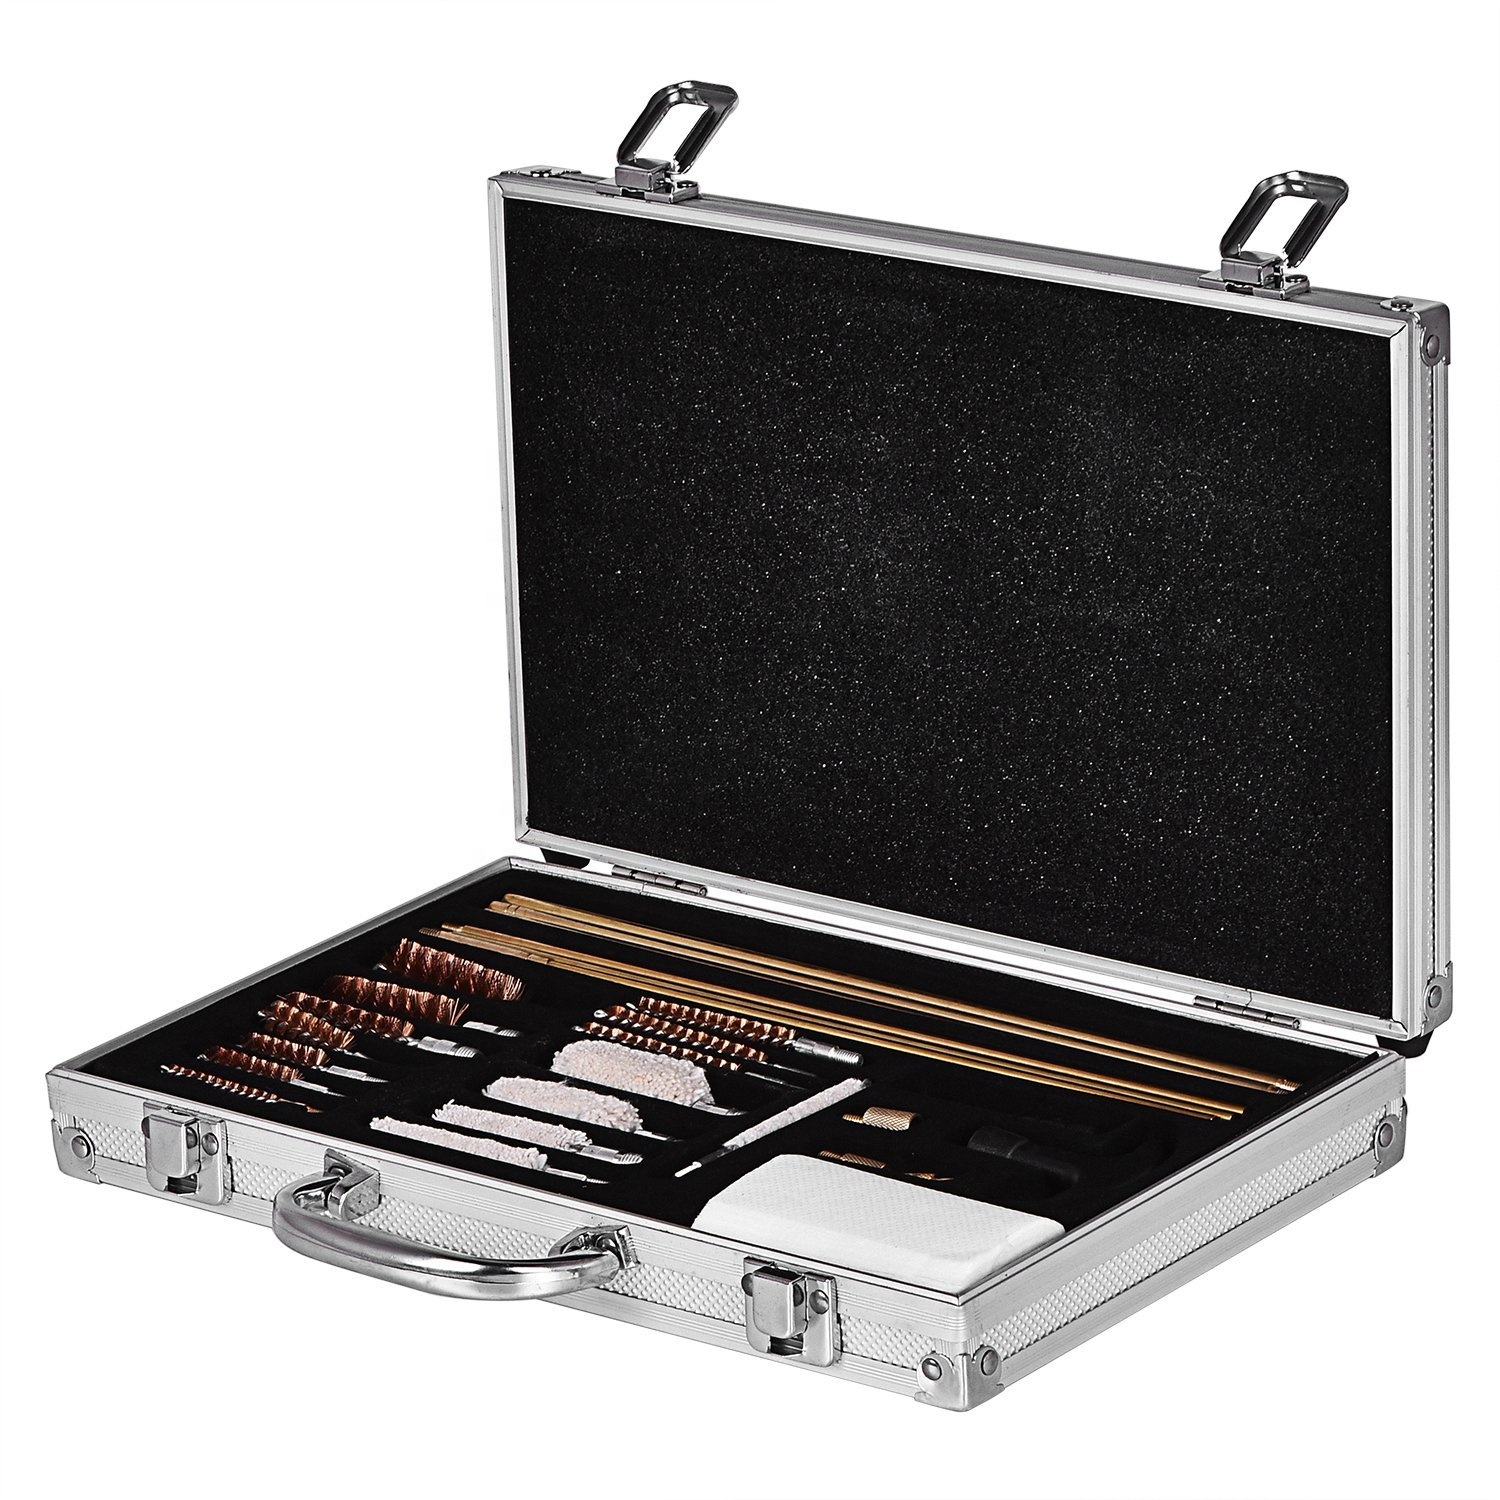  Gun Cleaning Kit with Aluminum box